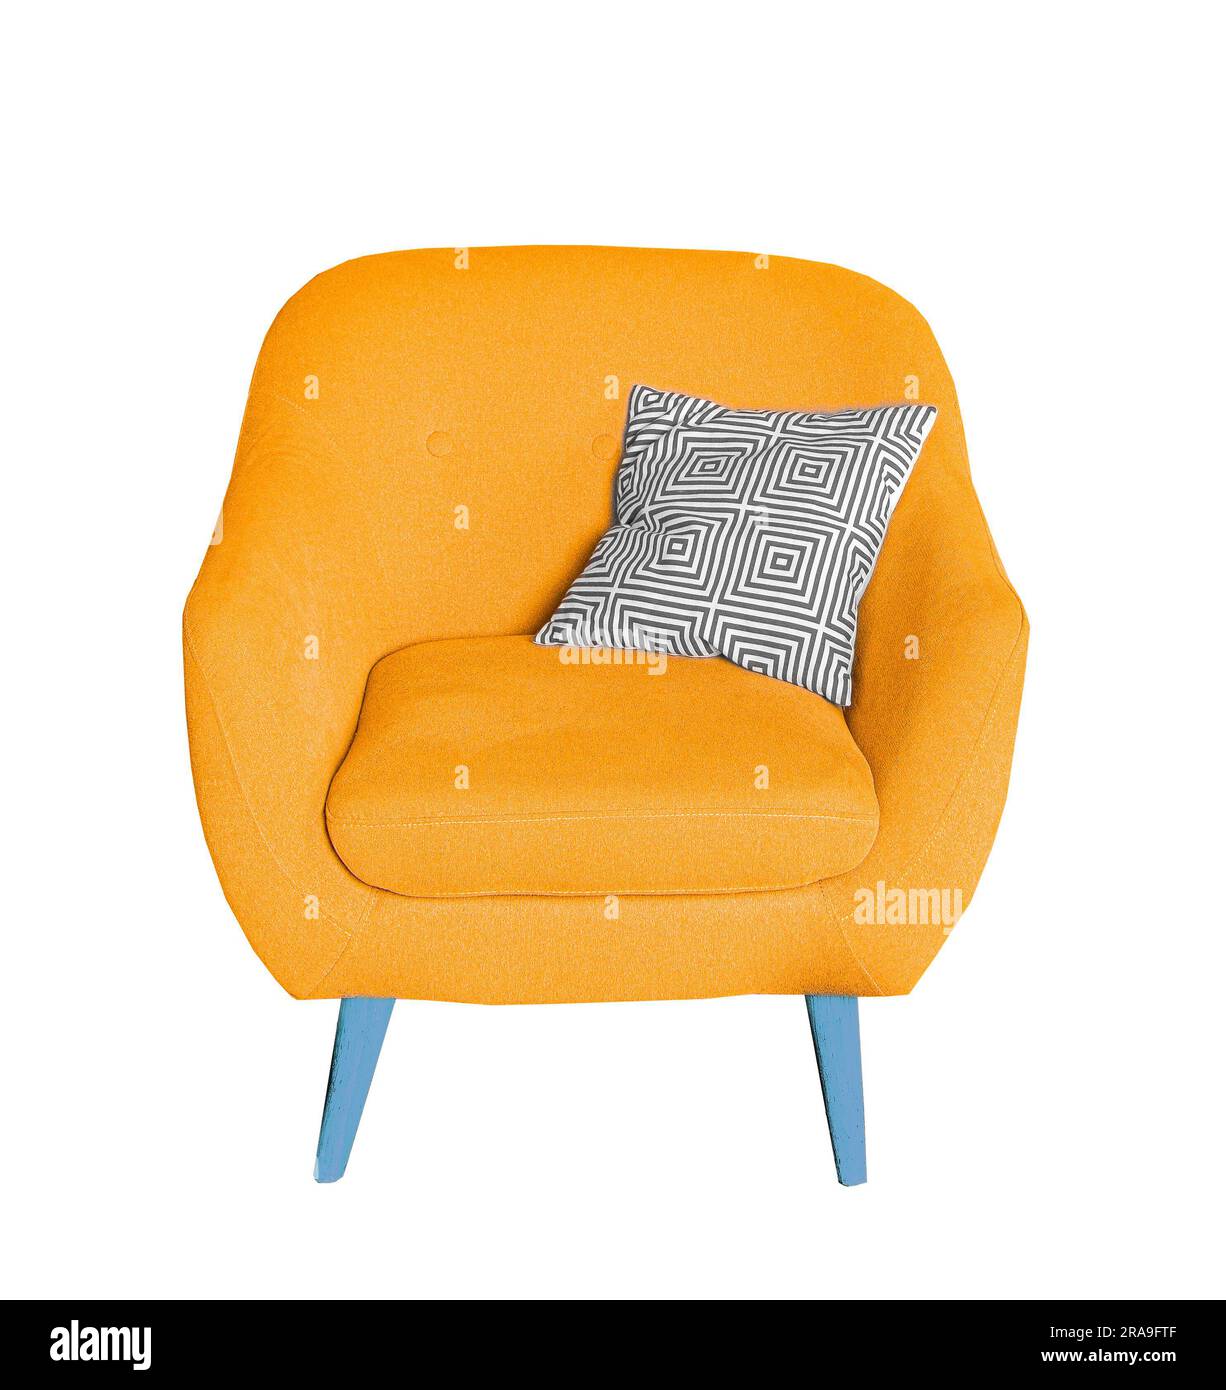 Easy chair on a white background. Yellow blue furniture modern furniture. Armchair with cushion. Room and interior decor. Stock Photo